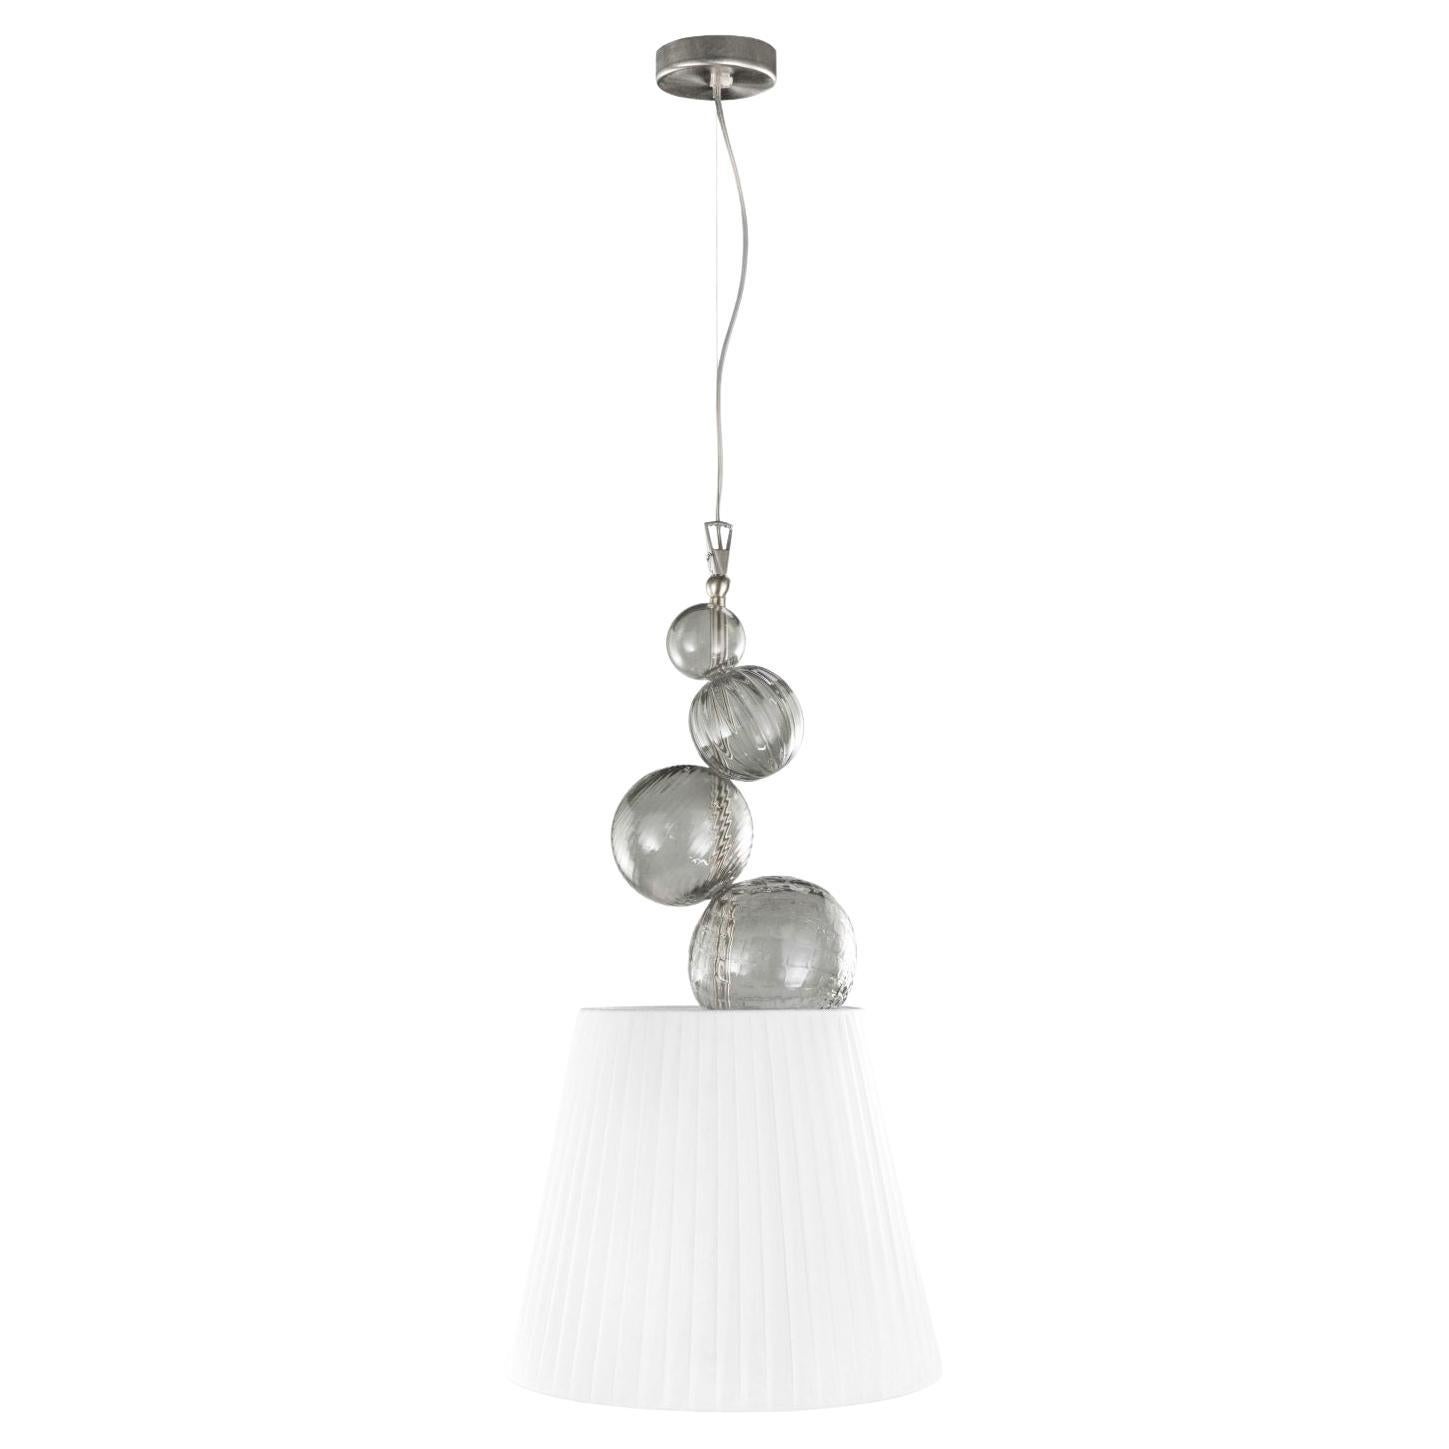 21st Century Artistic Pendant 1 Light, Grey Murano Glass by Multiforme For Sale